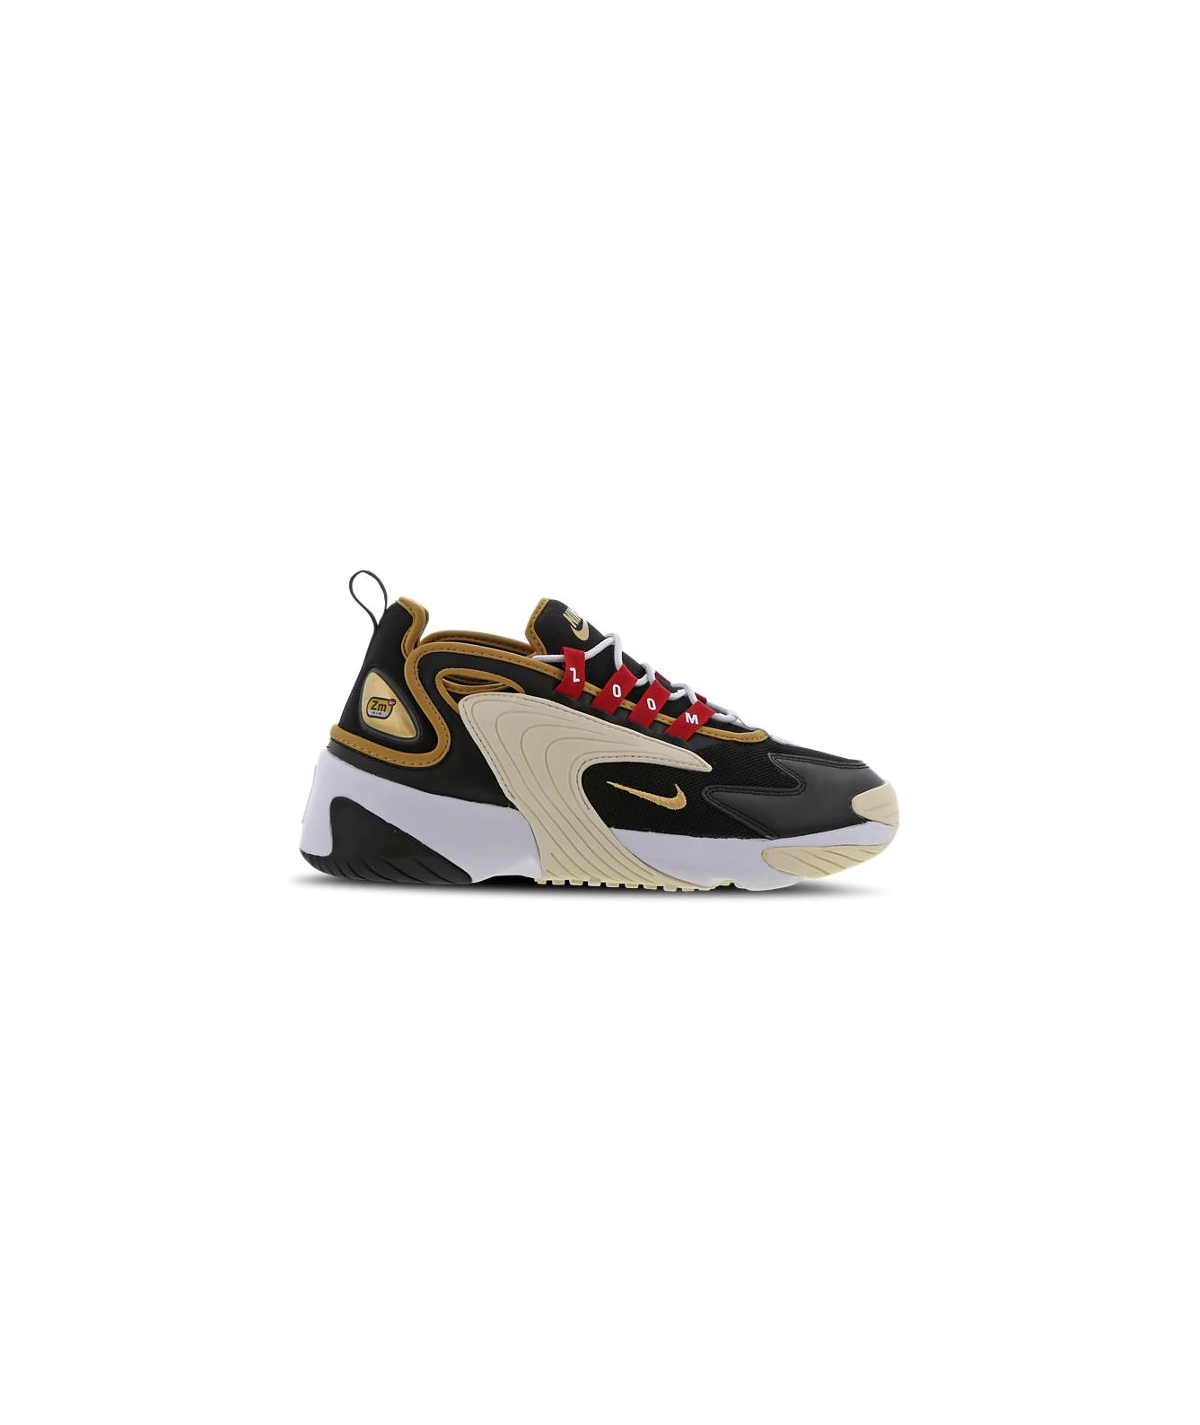 Nike Zoom 2K I Chaussure Noir Or I Offre Exclusive Site fiable Polostore I Guadeloupe Caraibes